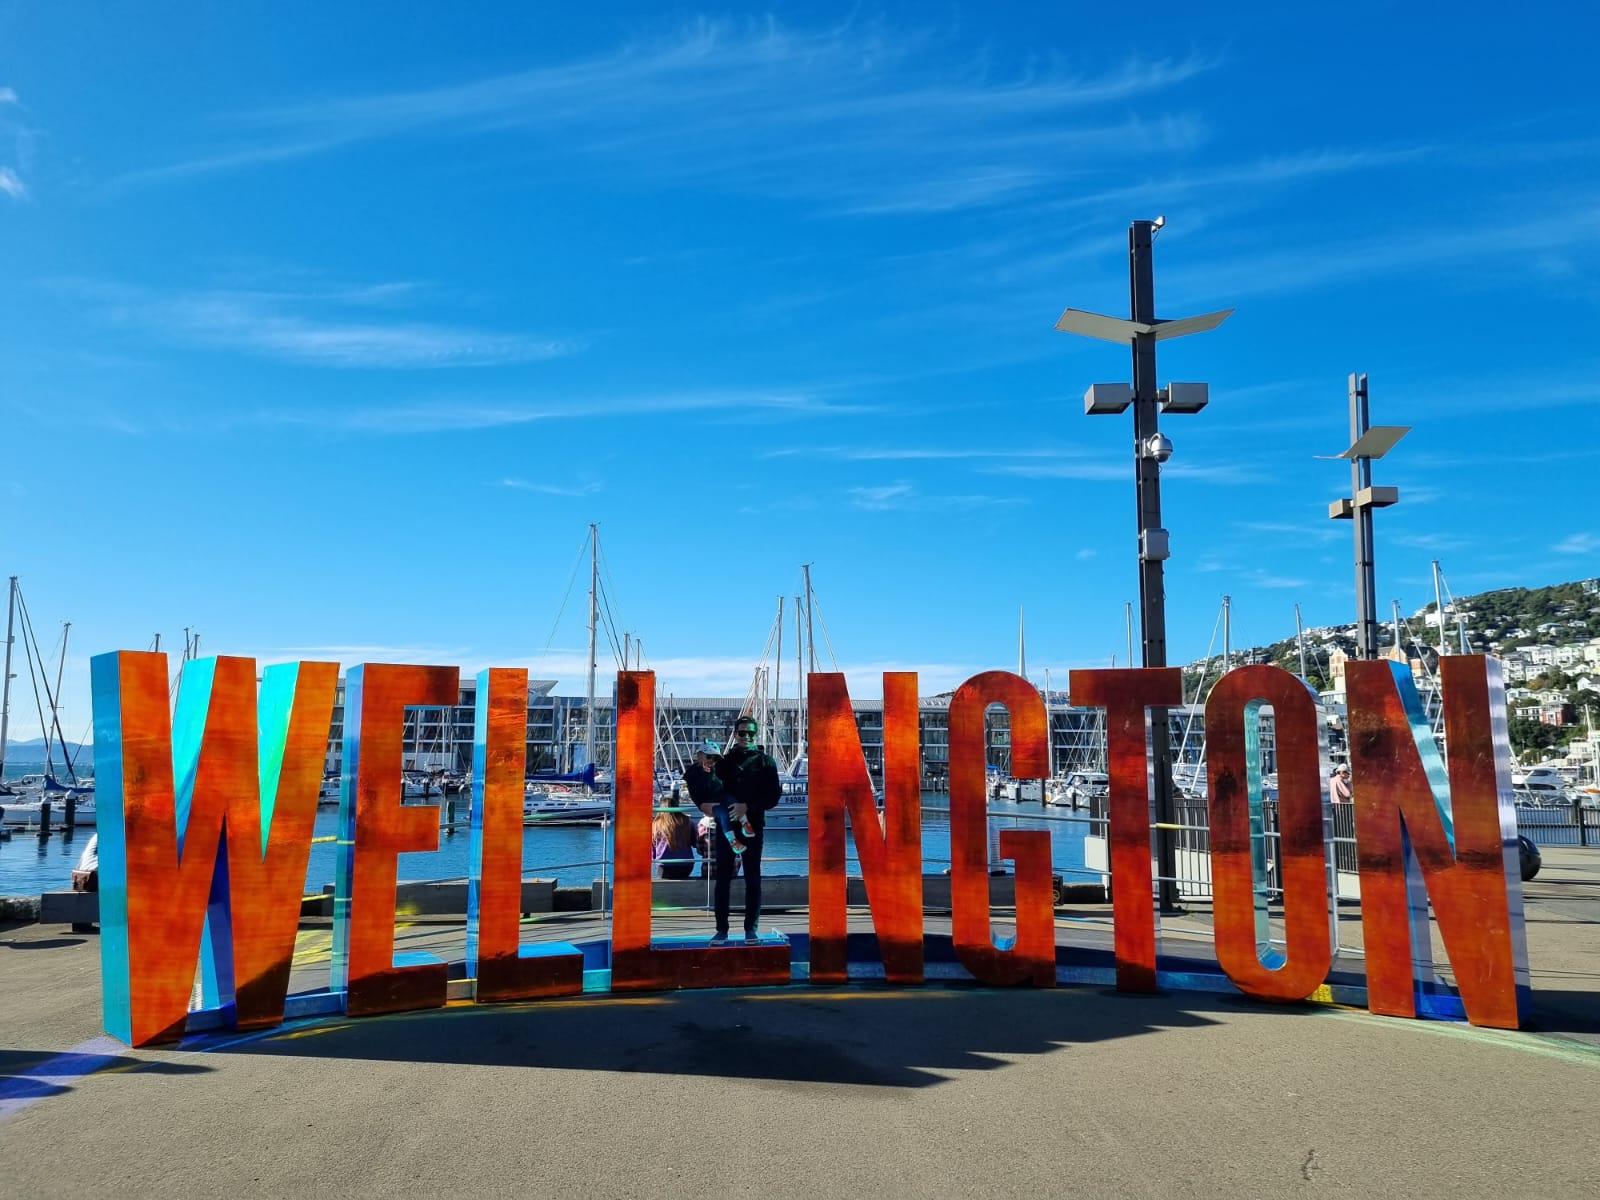 Welly sign